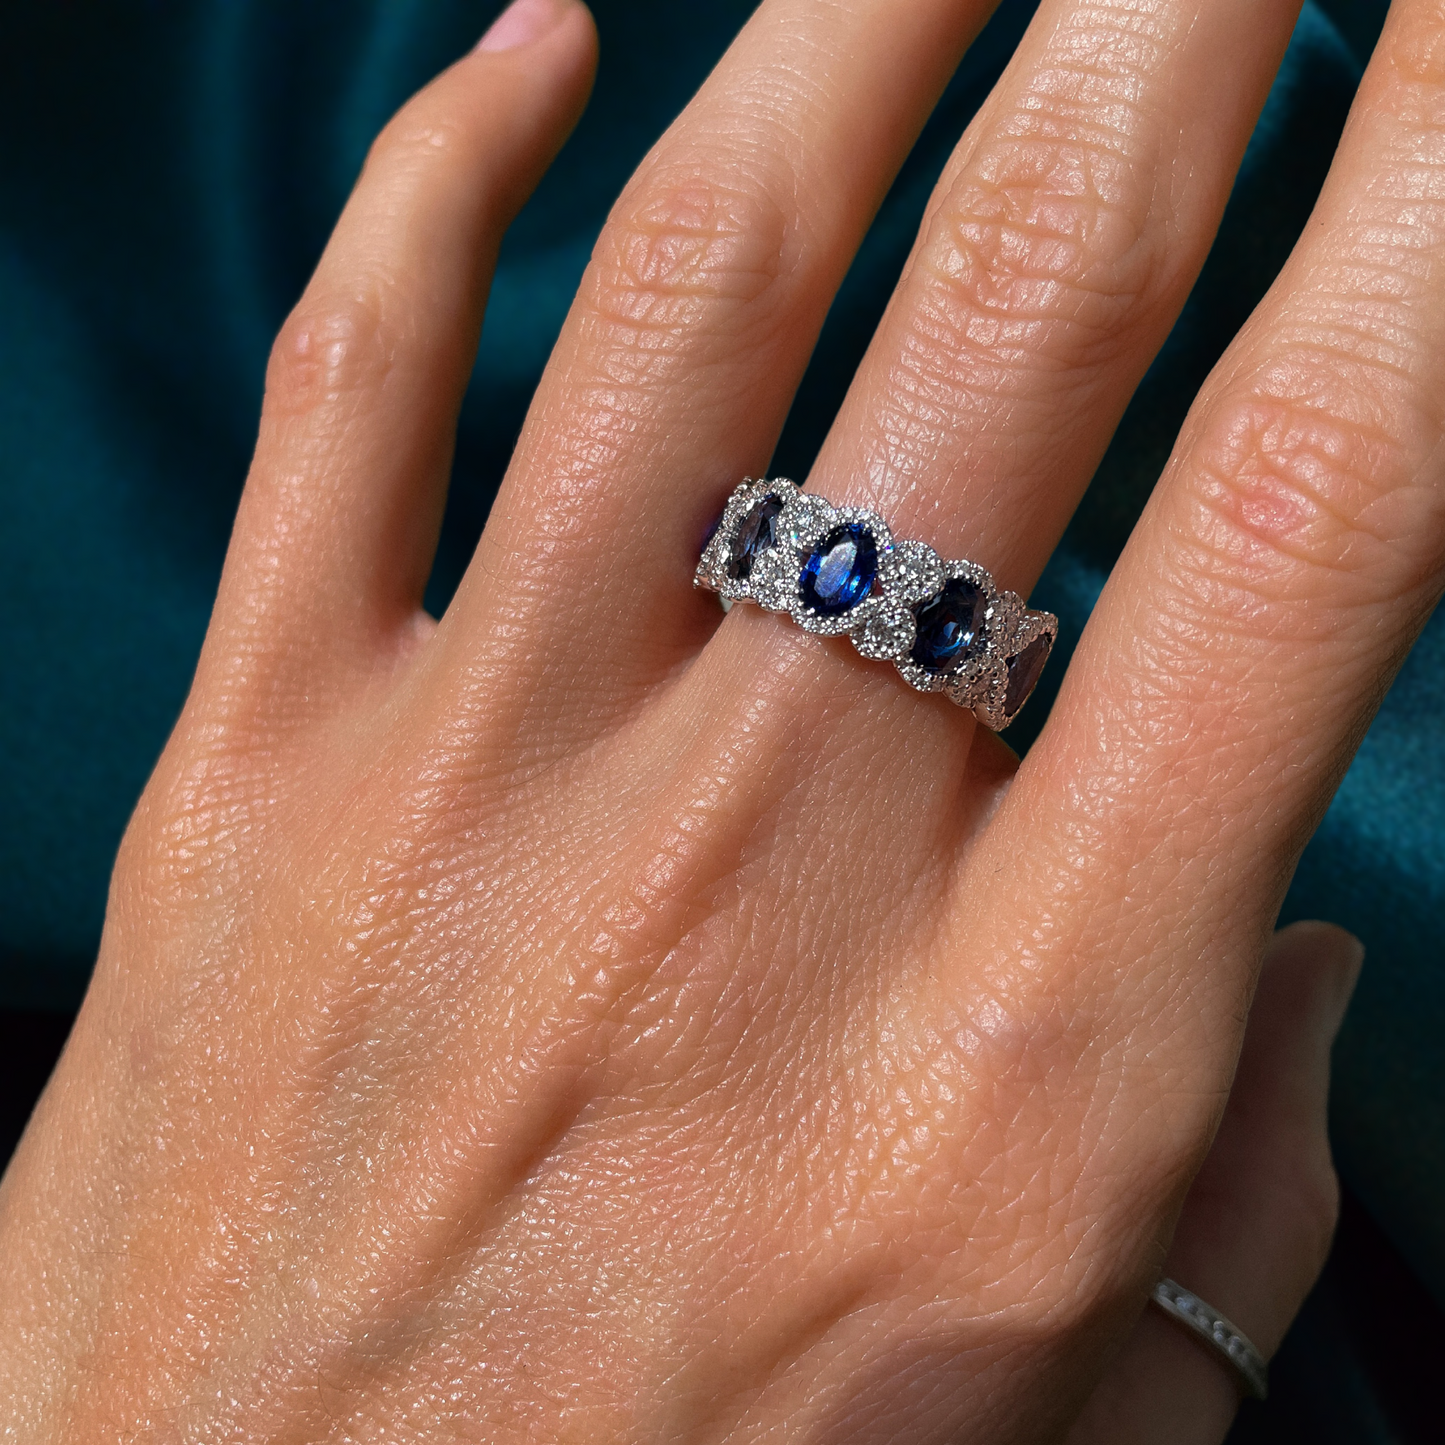 The Sapphire and Diamond Ring